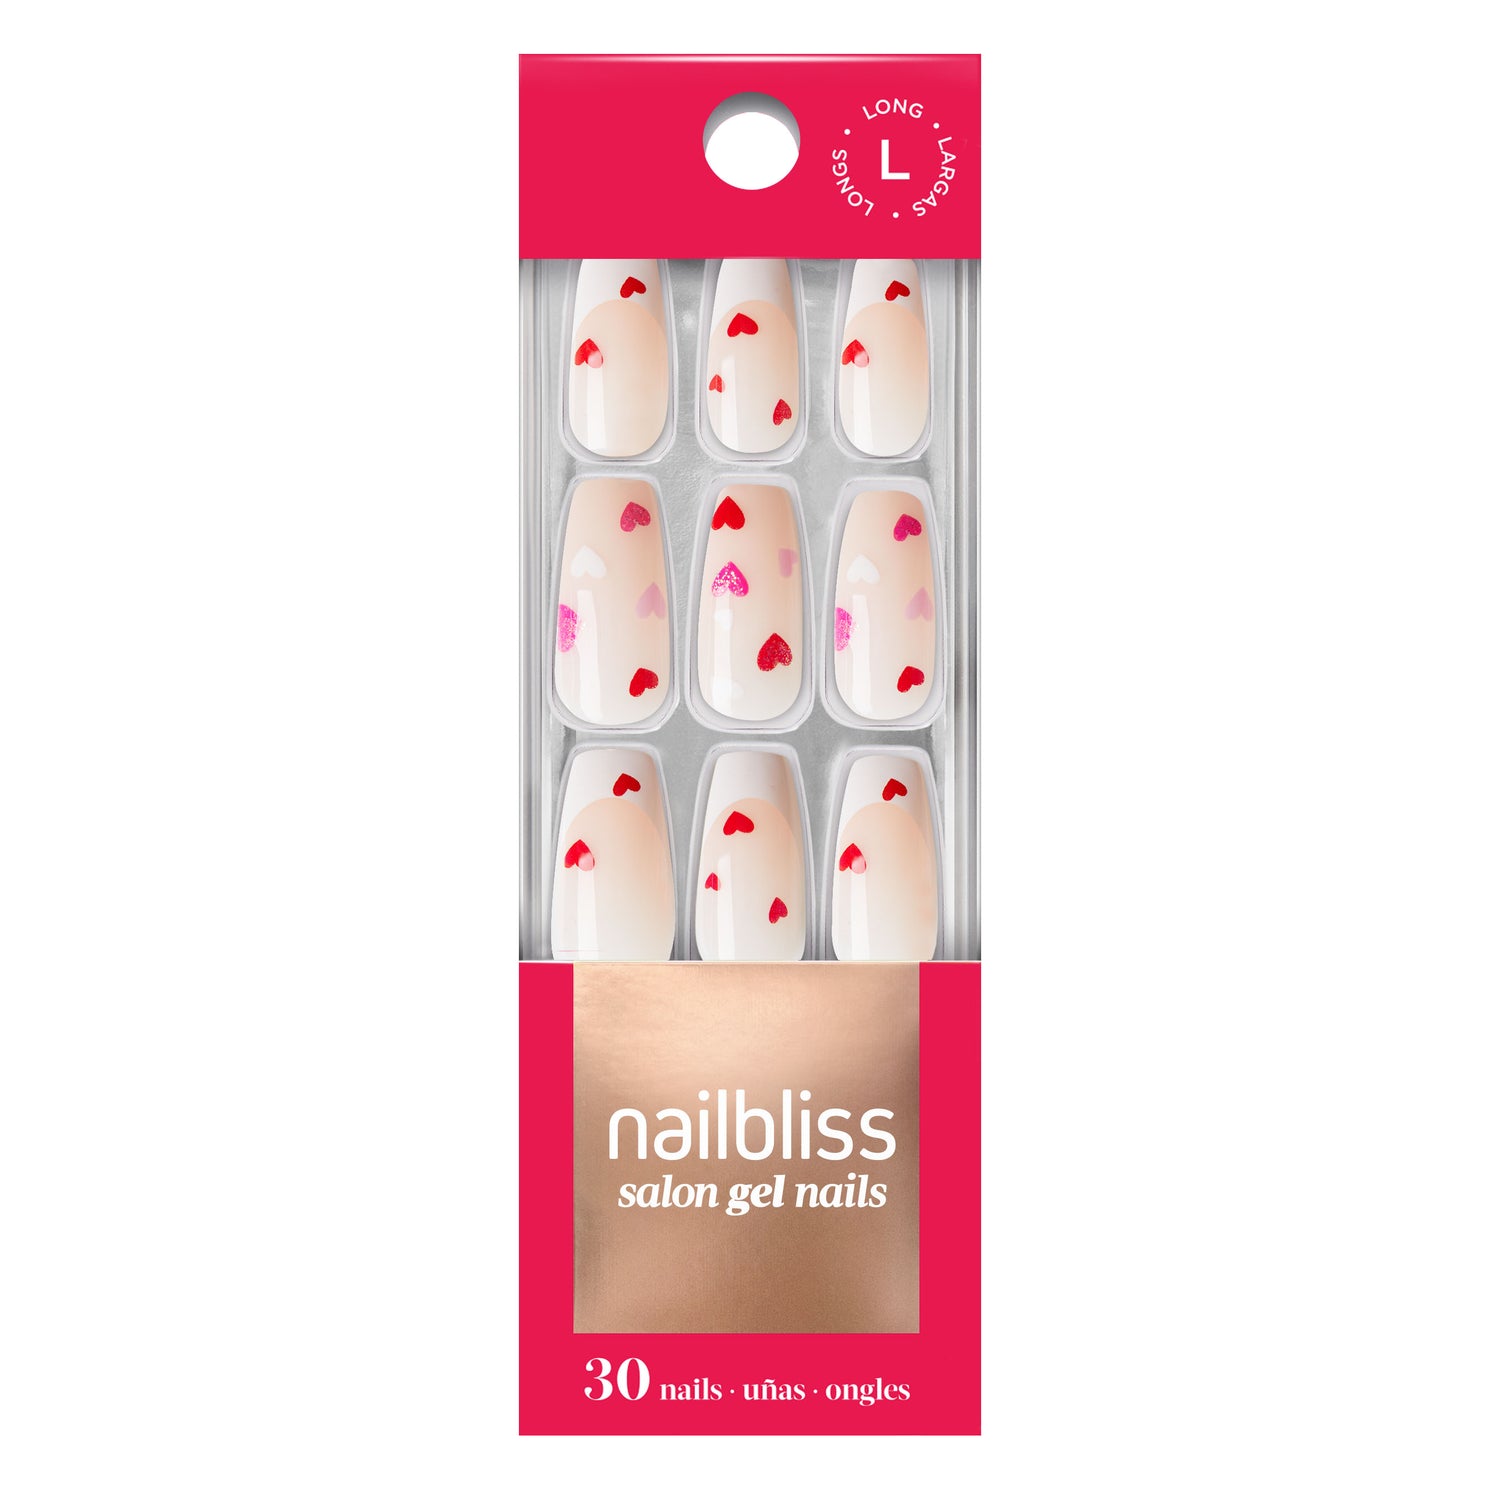  Long length, coffin shape, glossy finish nude & white glue-on nails featuring a white French tip and floating hearts